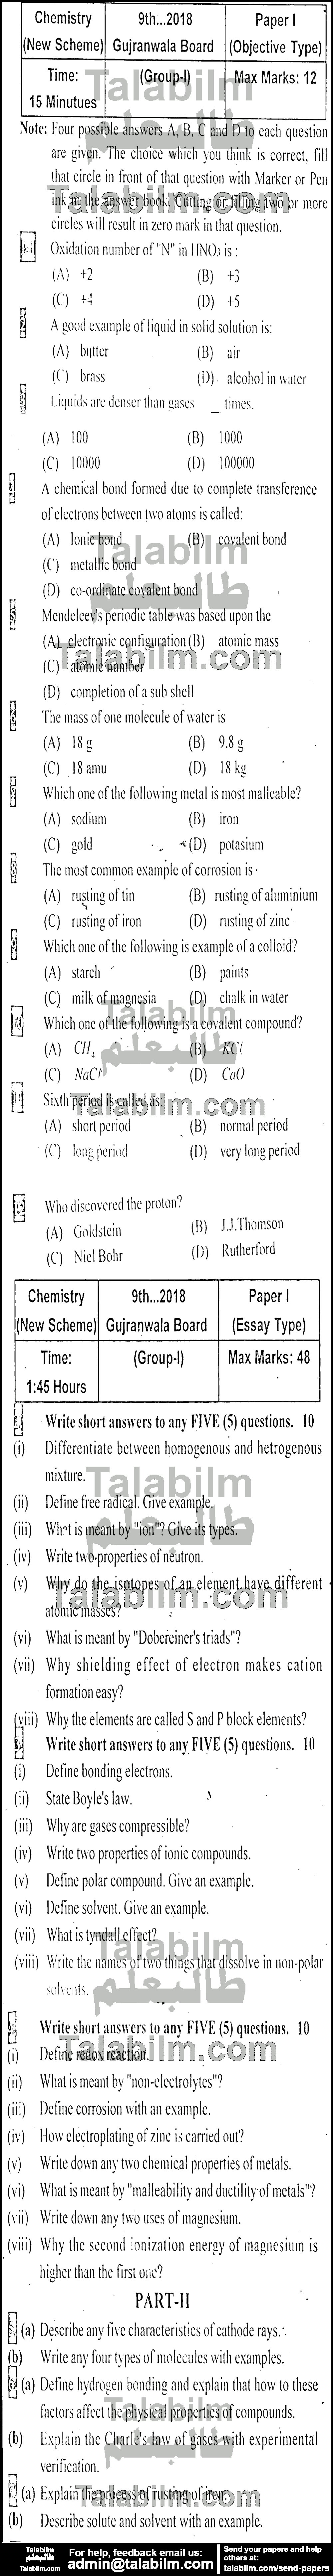 Chemistry 0 past paper for English Medium 2018 Group-I